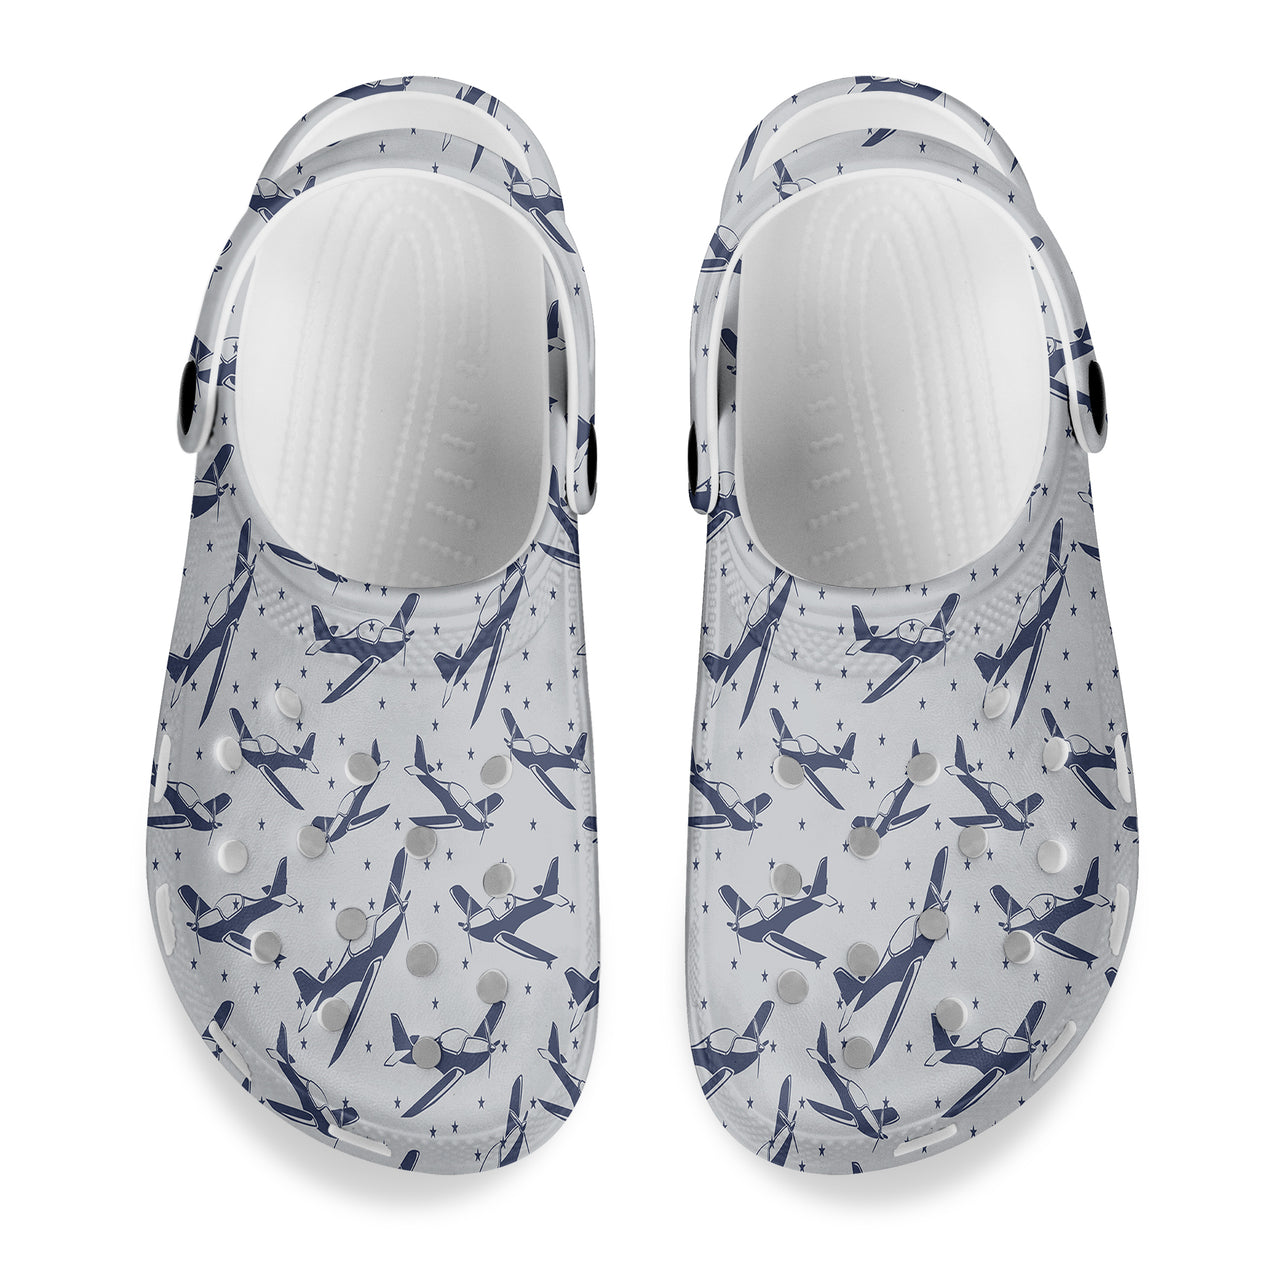 Propellers & Stars Designed Hole Shoes & Slippers (MEN)